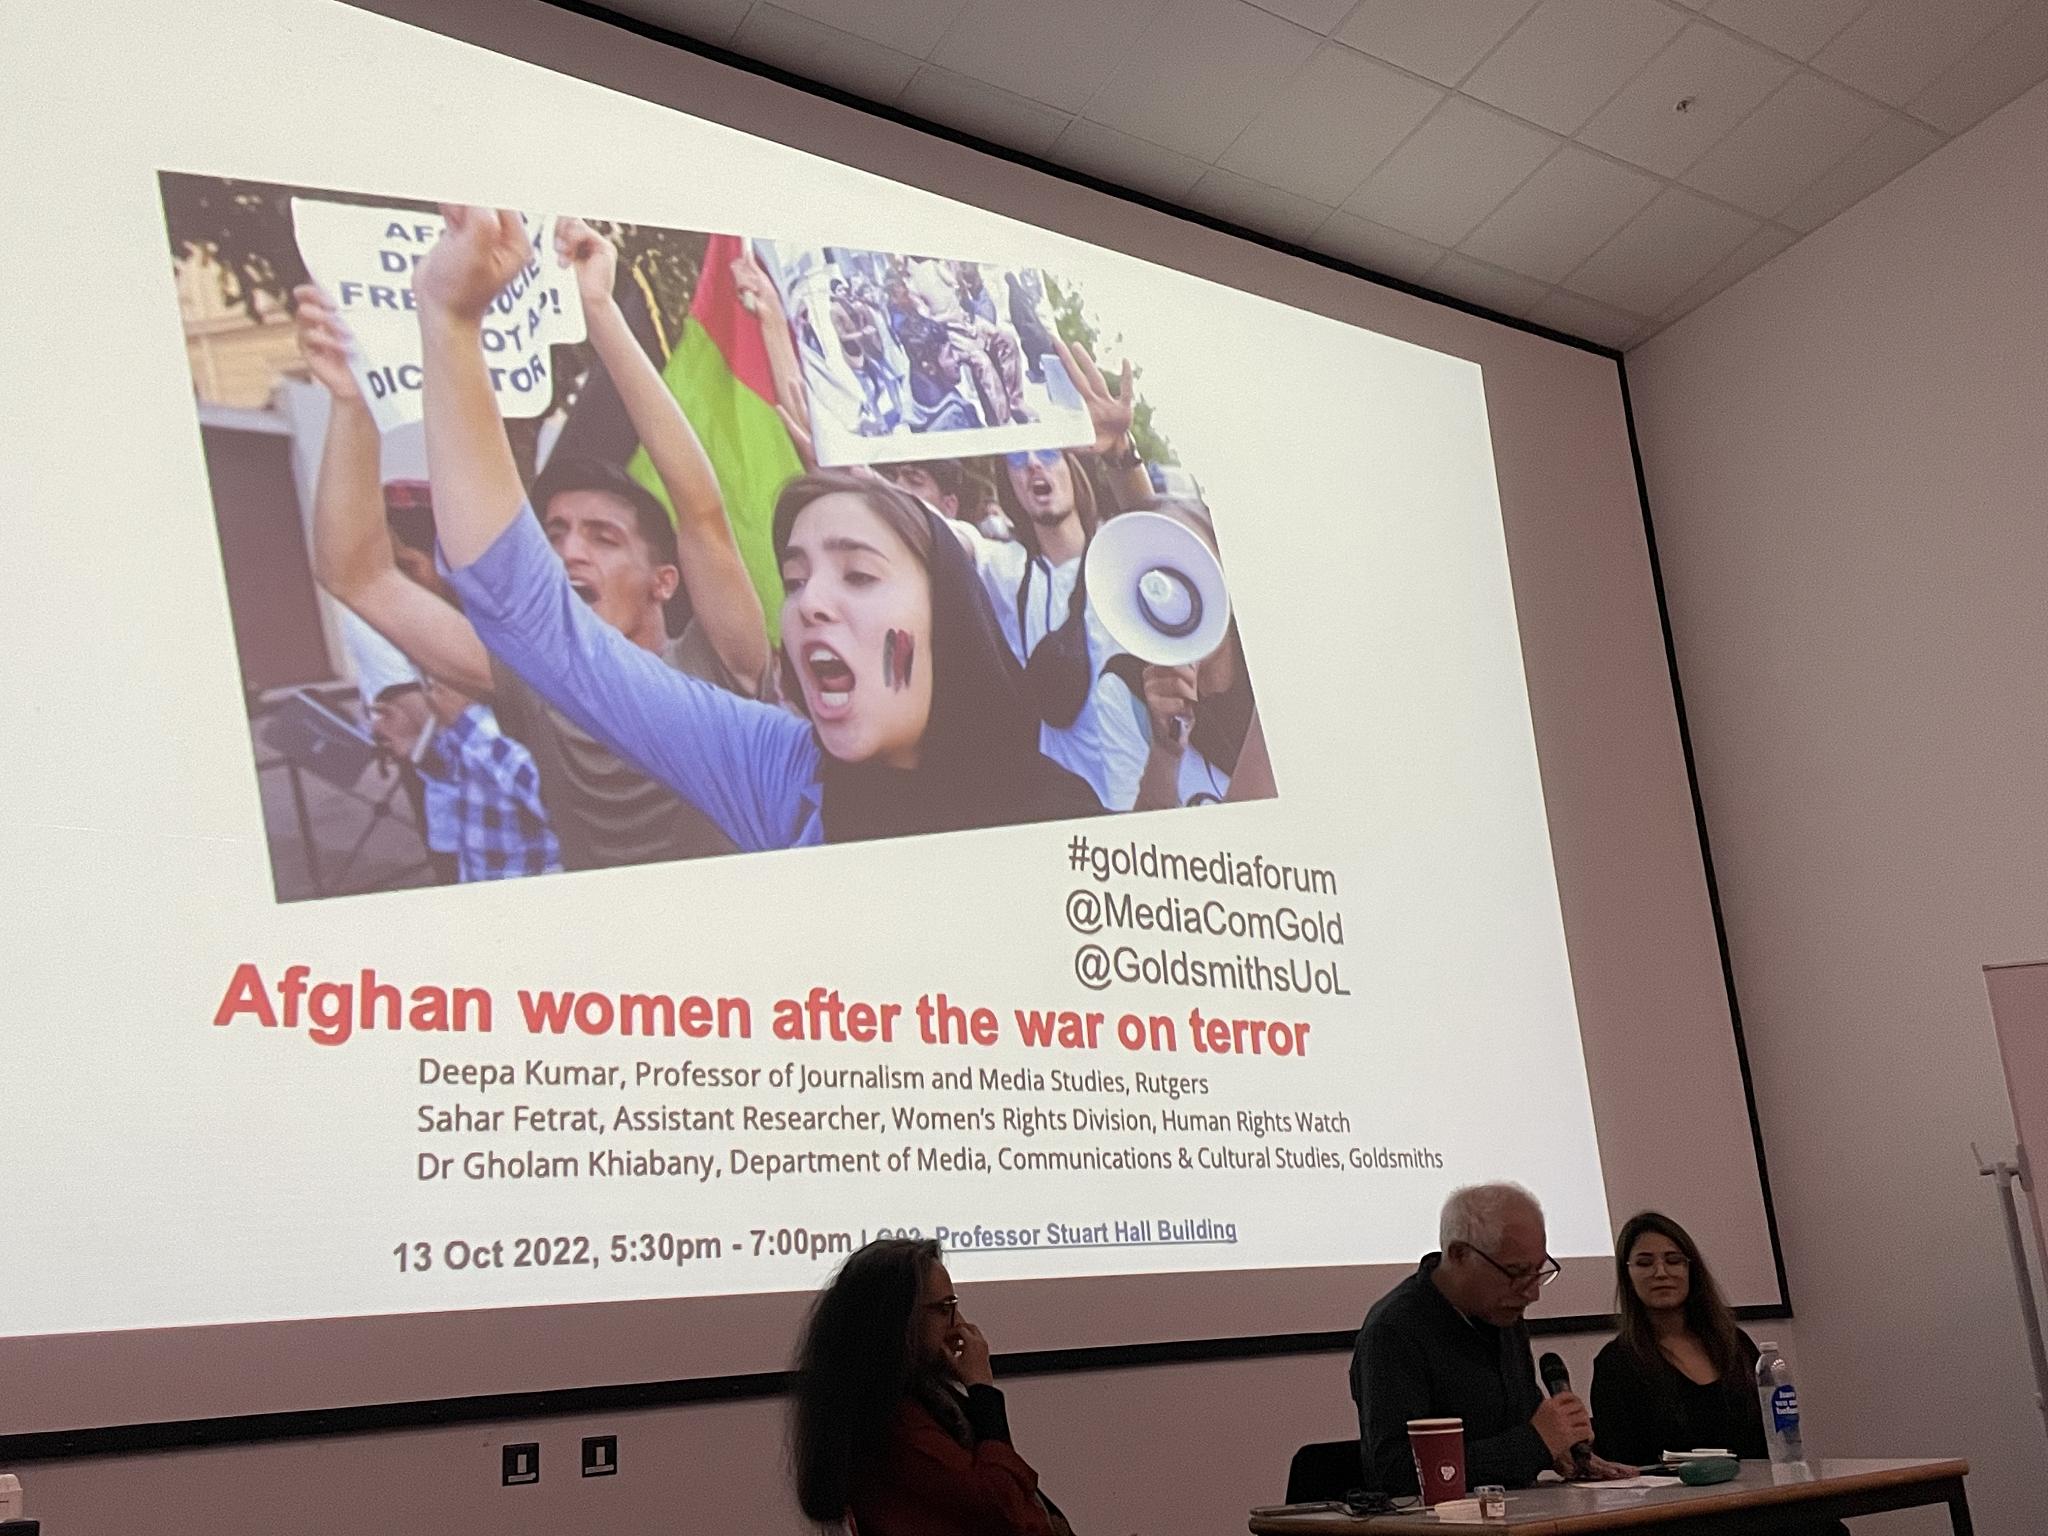 Afghanistan women and the aftermath of the war on terror: Panel discussion